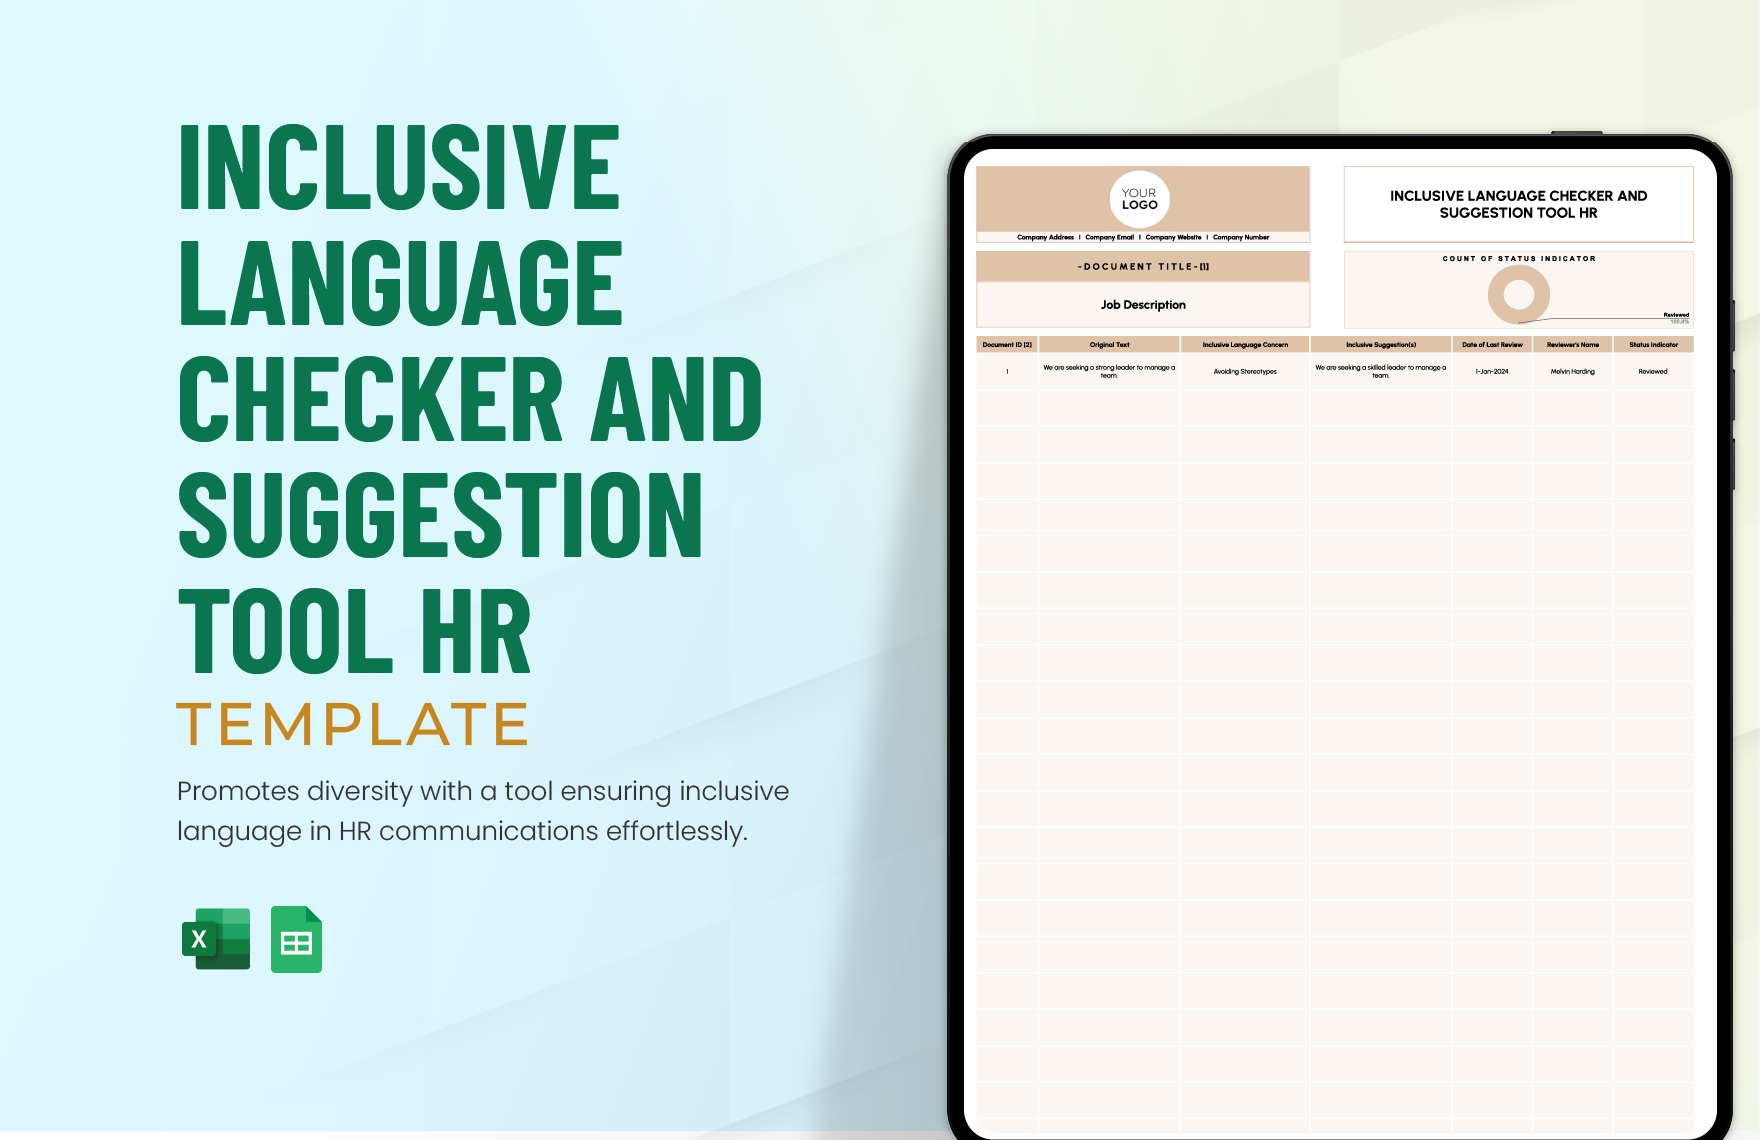 Inclusive Language Checker and Suggestion Tool HR Template